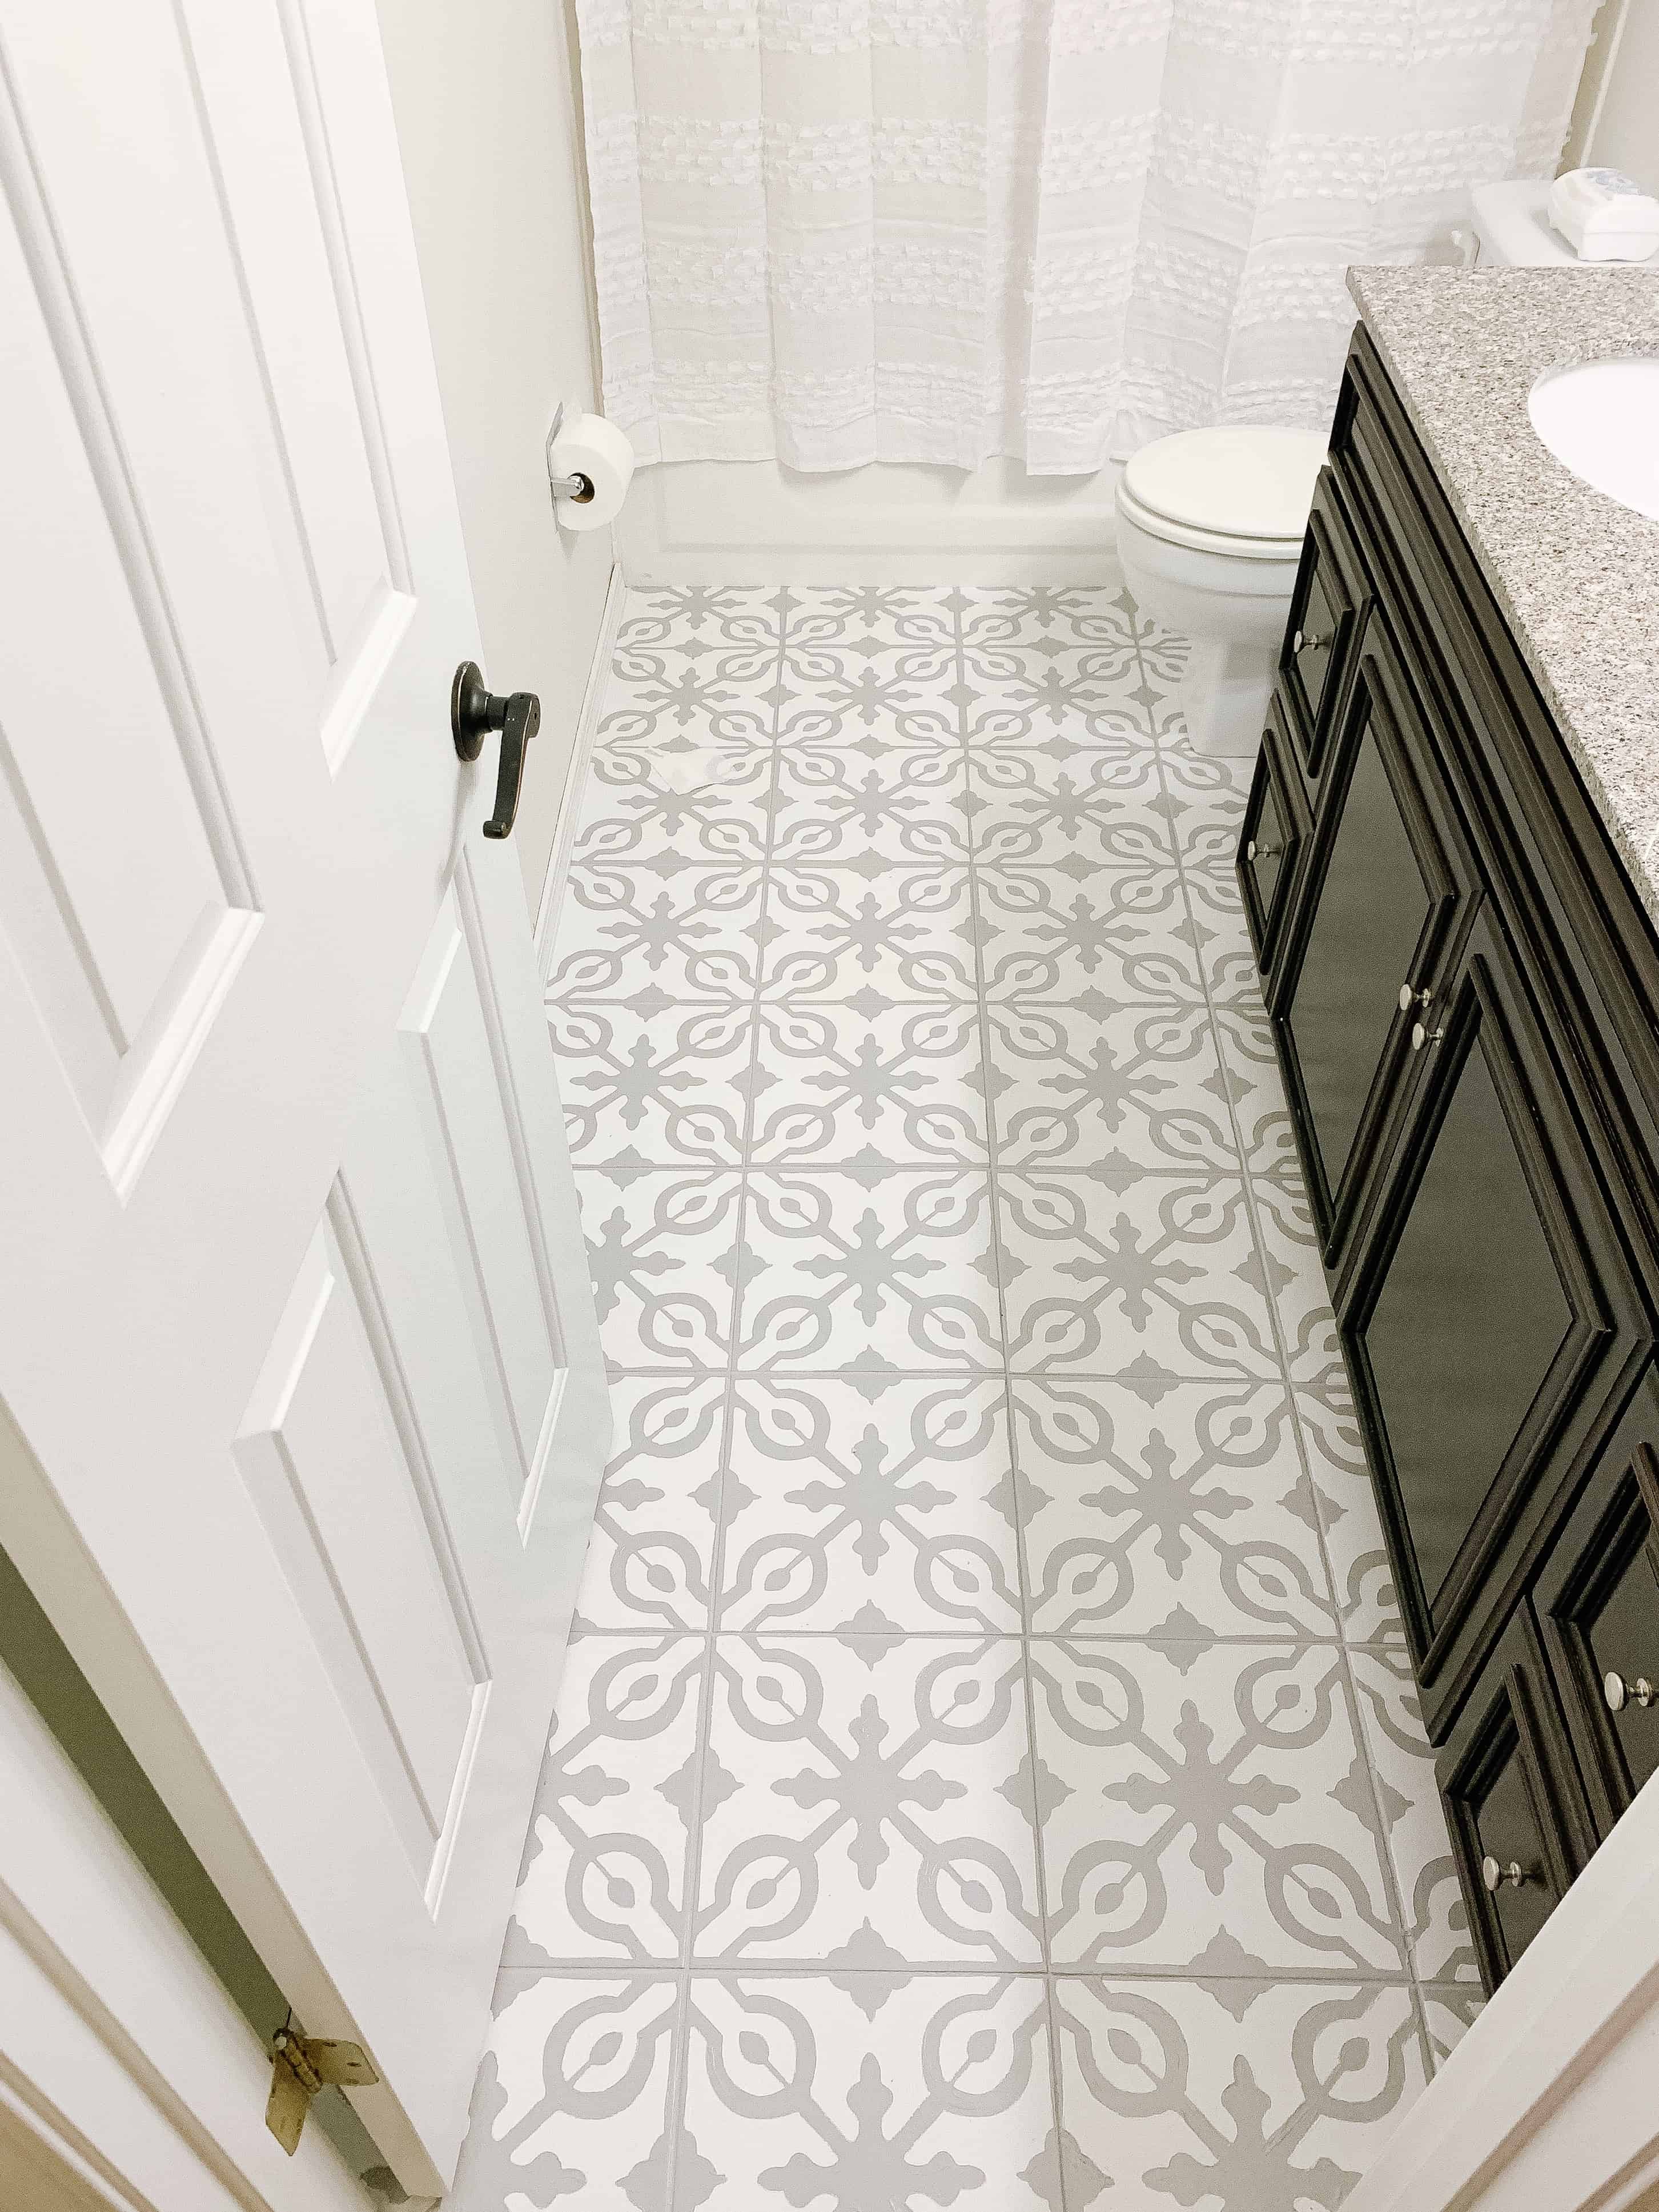 How To Paint Tile Floors, What Kind Of Paint Do You Use On Ceramic Tile Floors